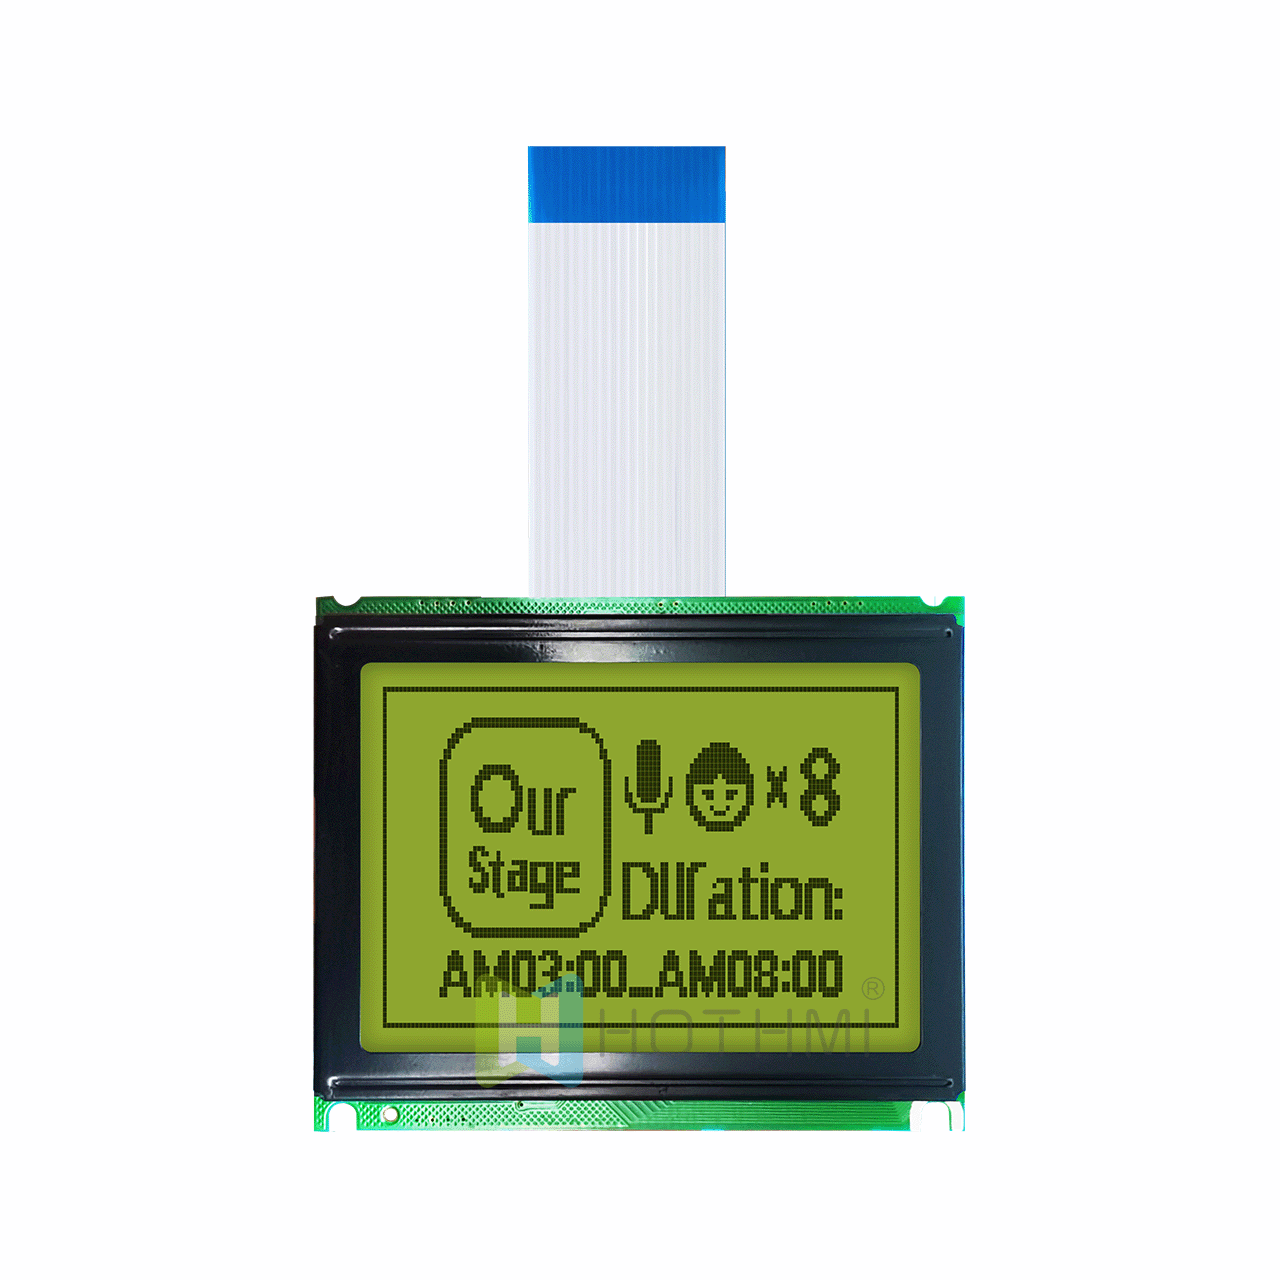 3" 128 x 64 LCD Graphic Display | 128x64 Graphic LCD Module | STN Positive Display Yellow-Green Backlight